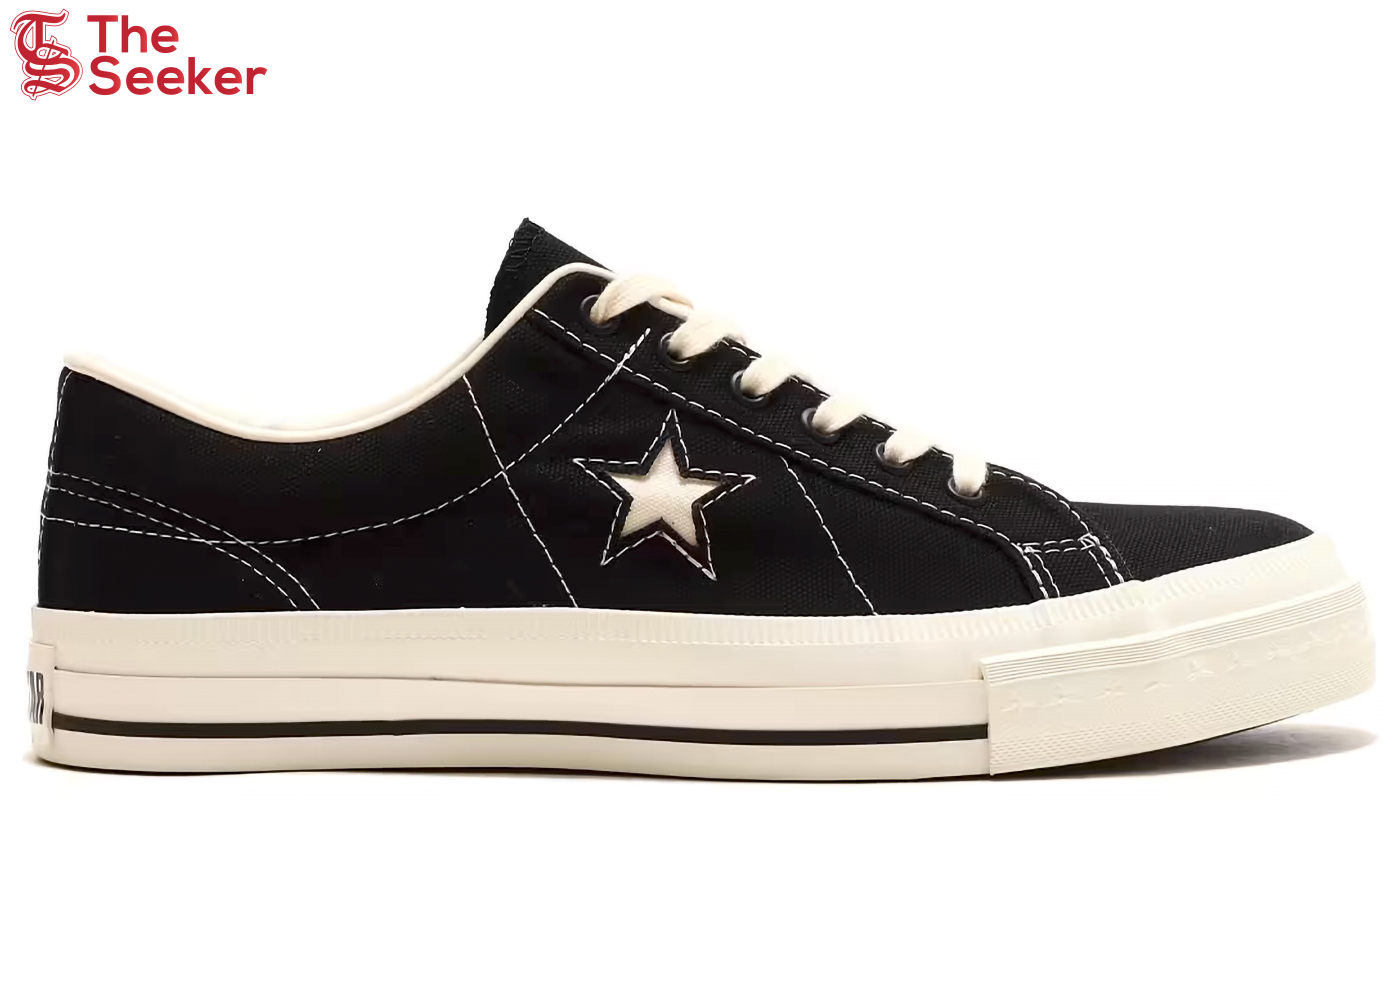 Converse One Star Made in Japan Vintage Canvas Black